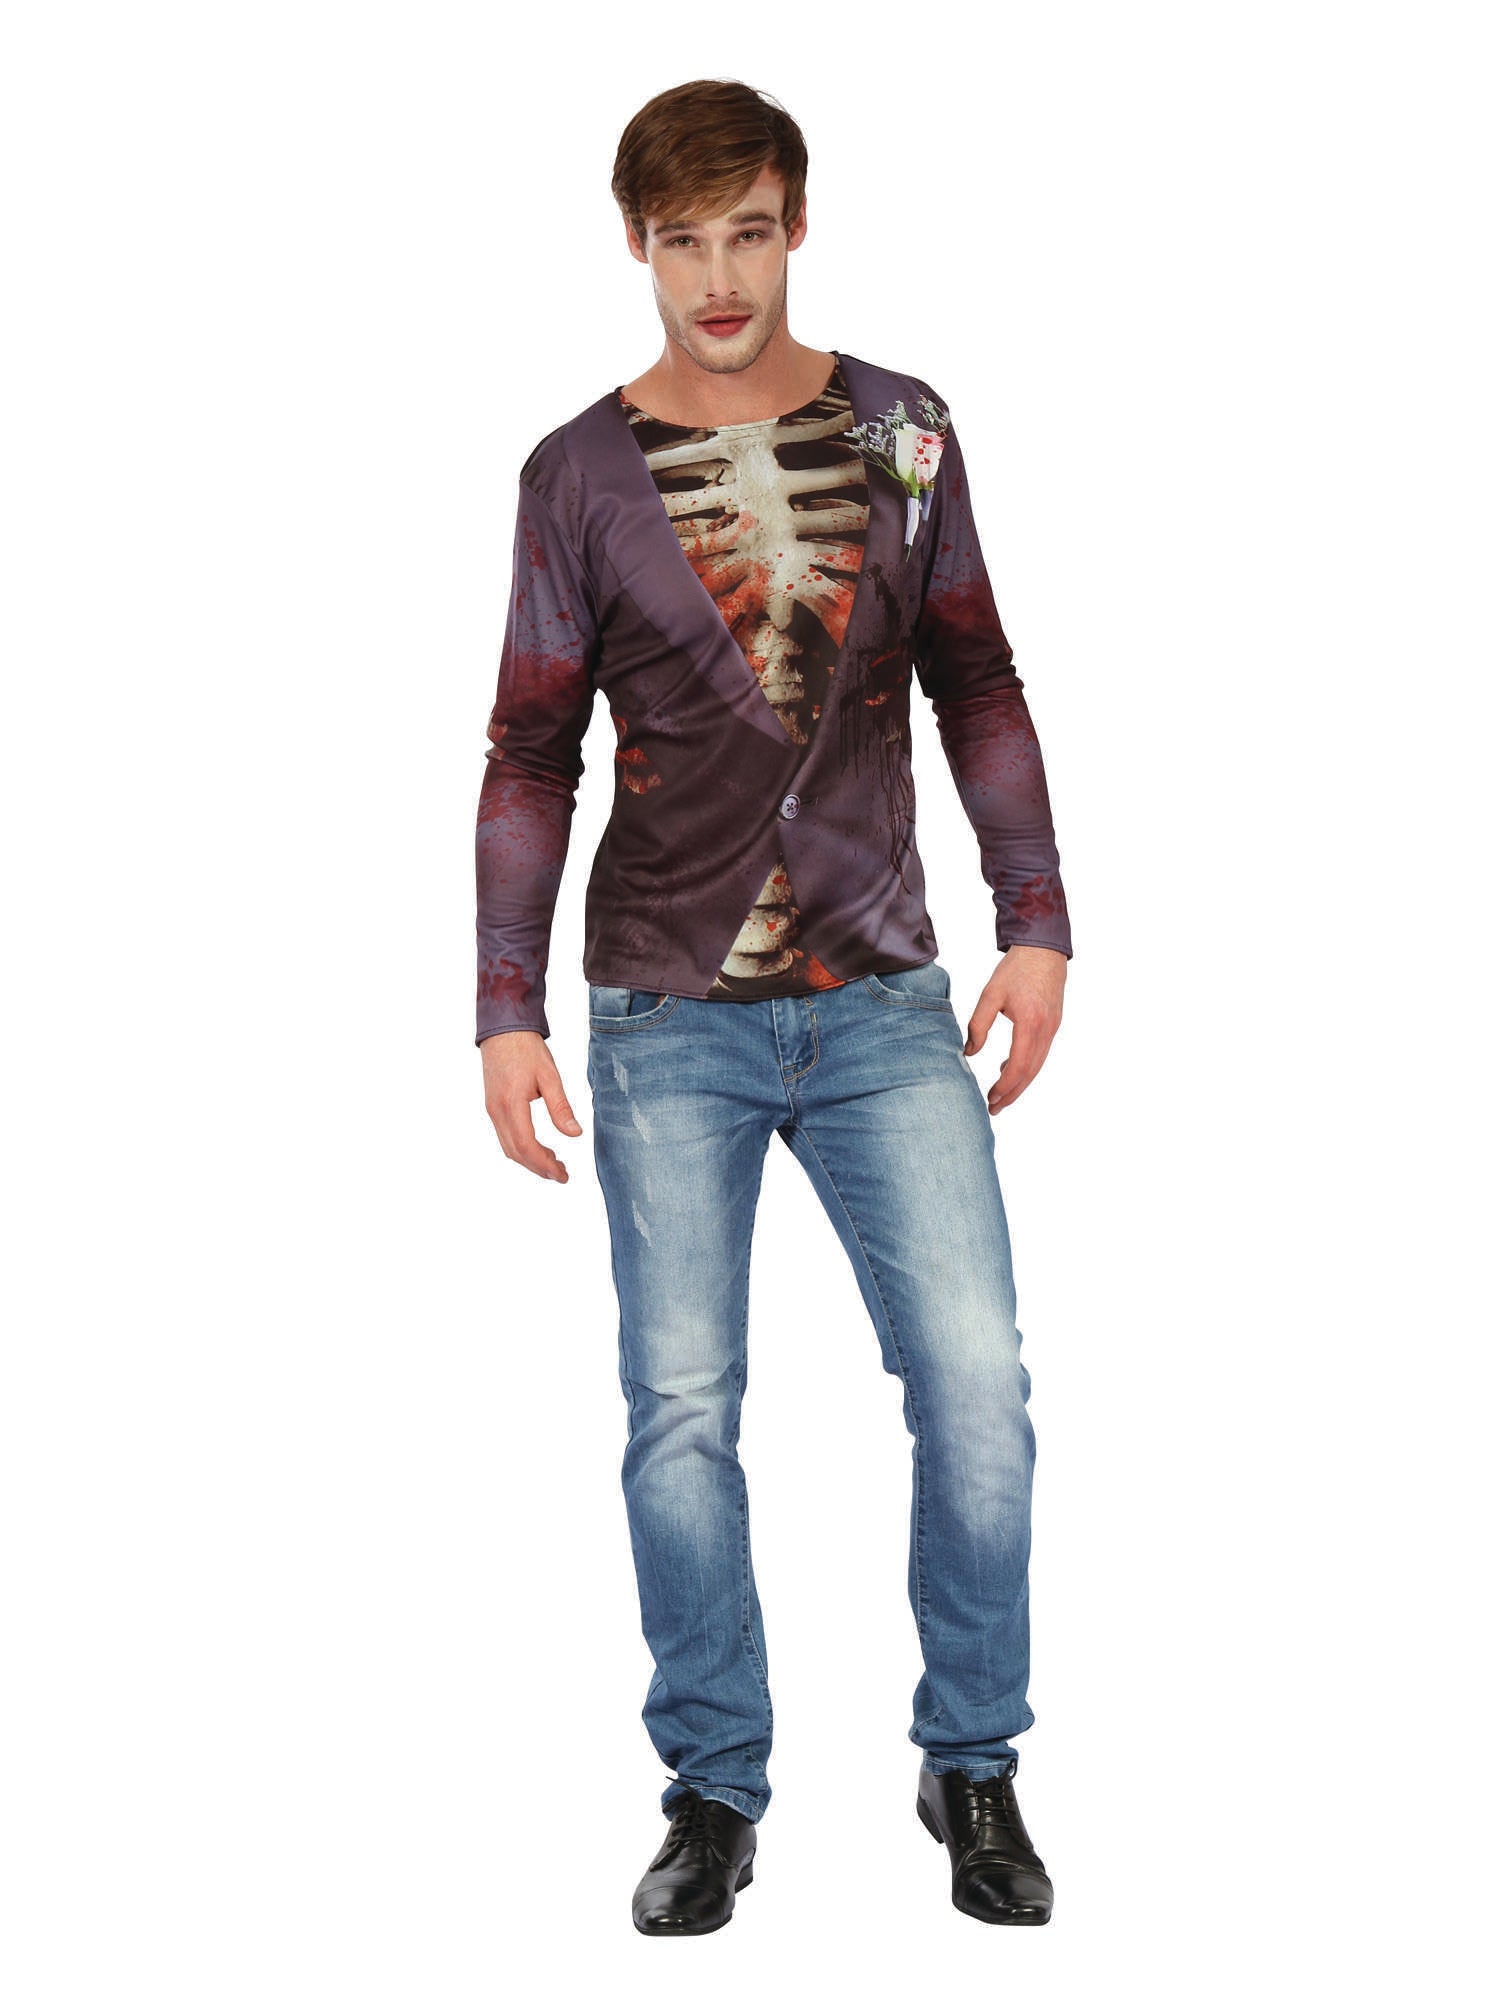 Zombie, Multi, Generic, Adult Costume, Standard, Front